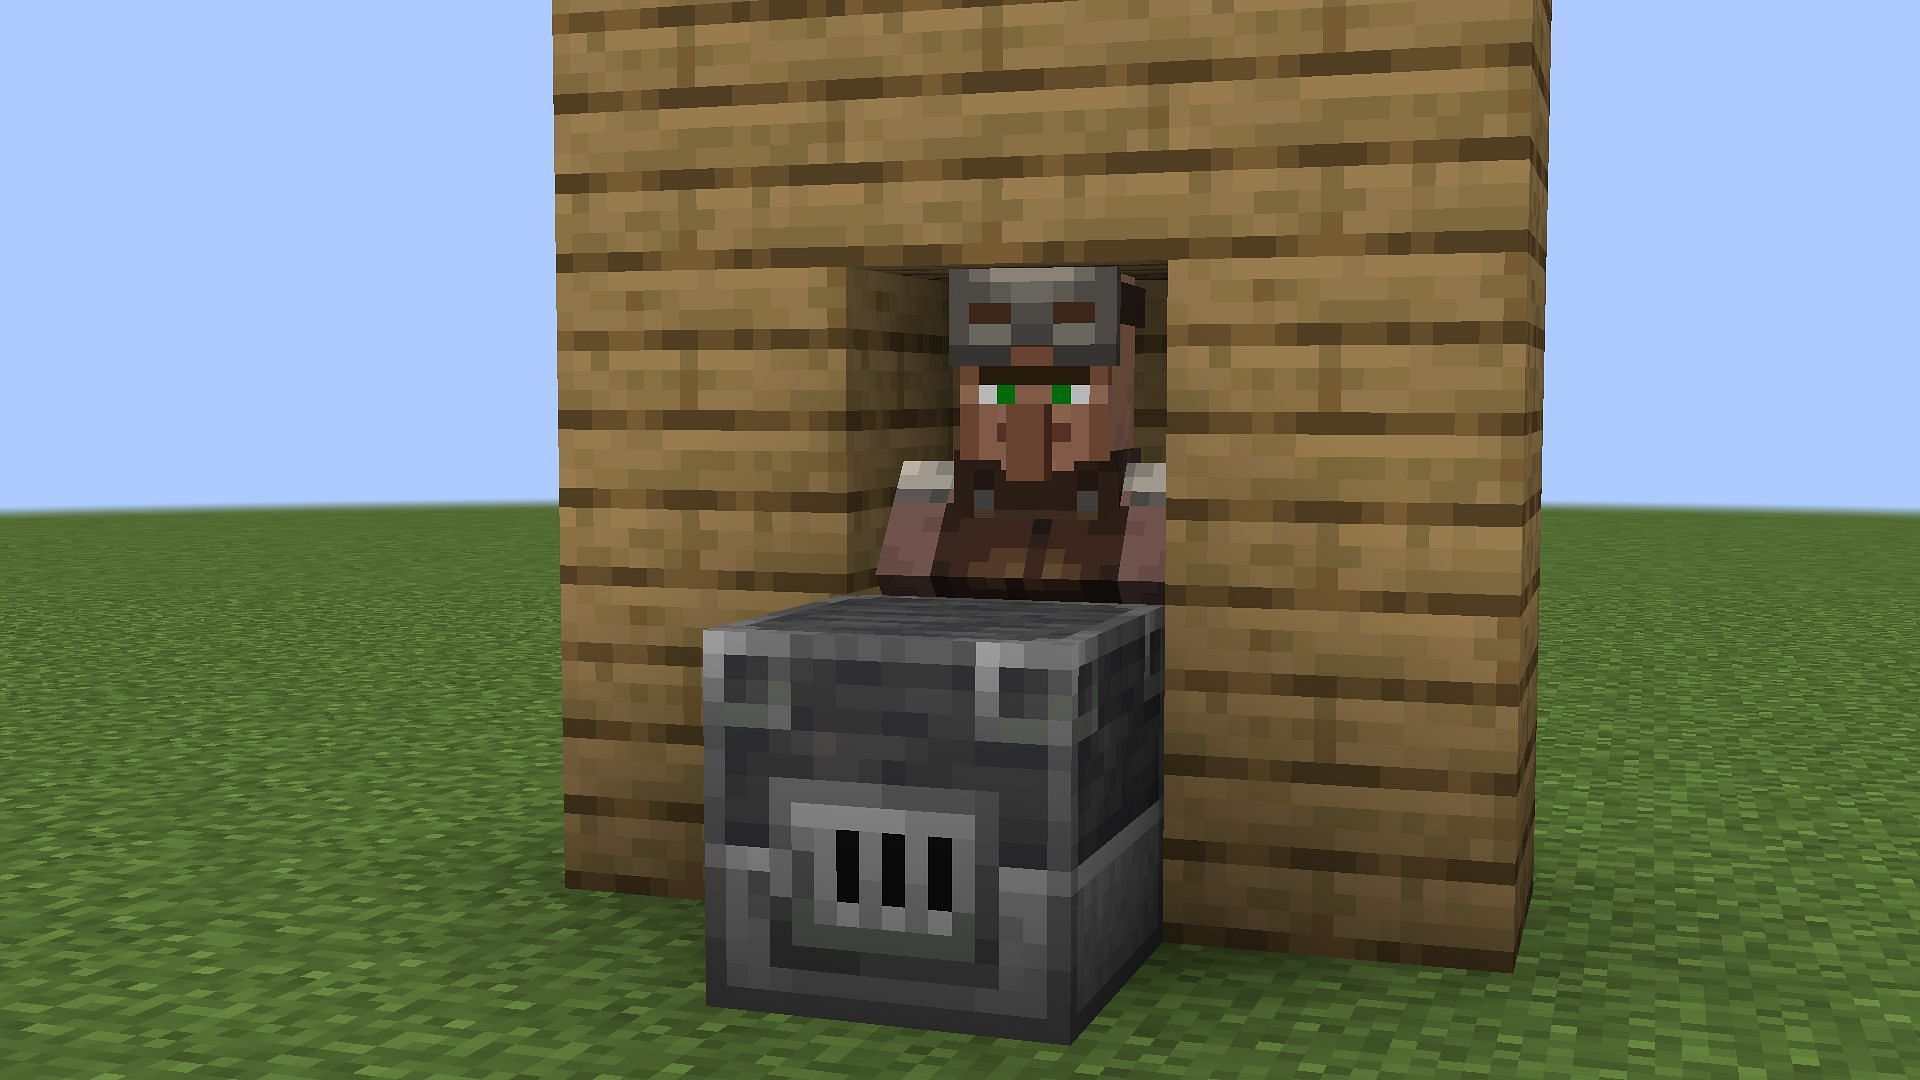 Blast furnace with an Armorer in Minecraft (Image via Mojang)